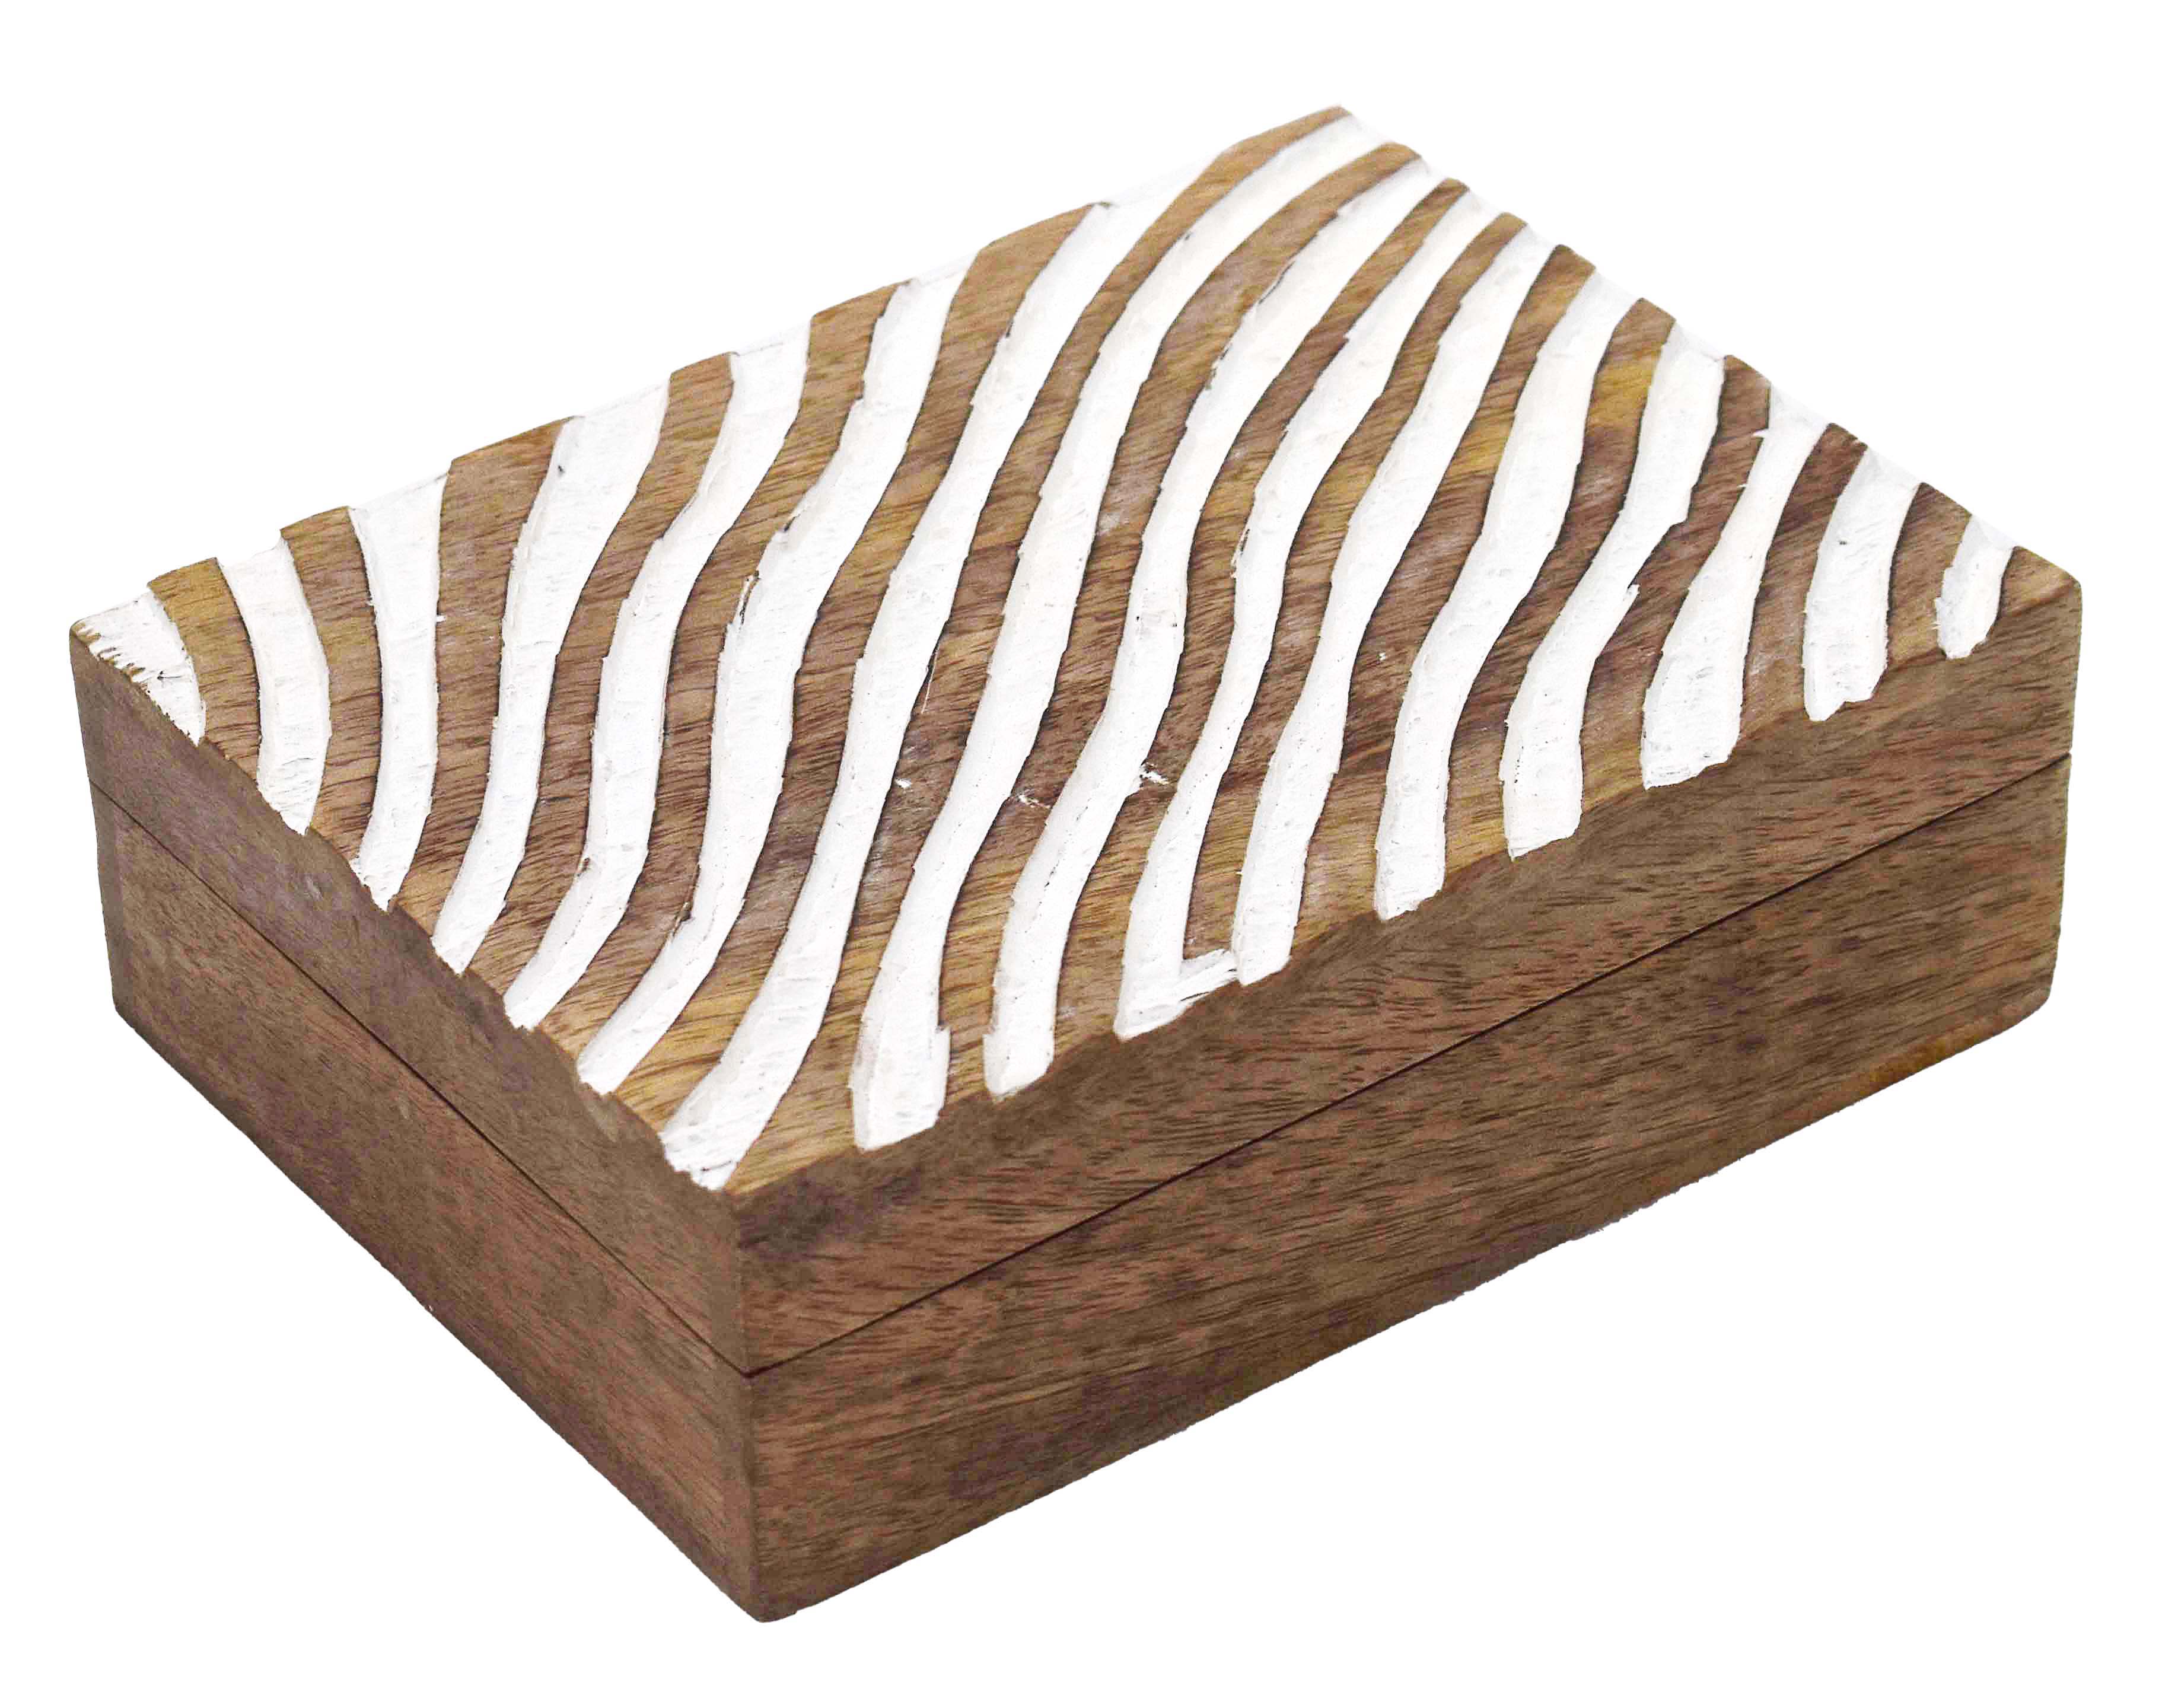 Striped carved wooden box 20.5x15.5x6.5 cm